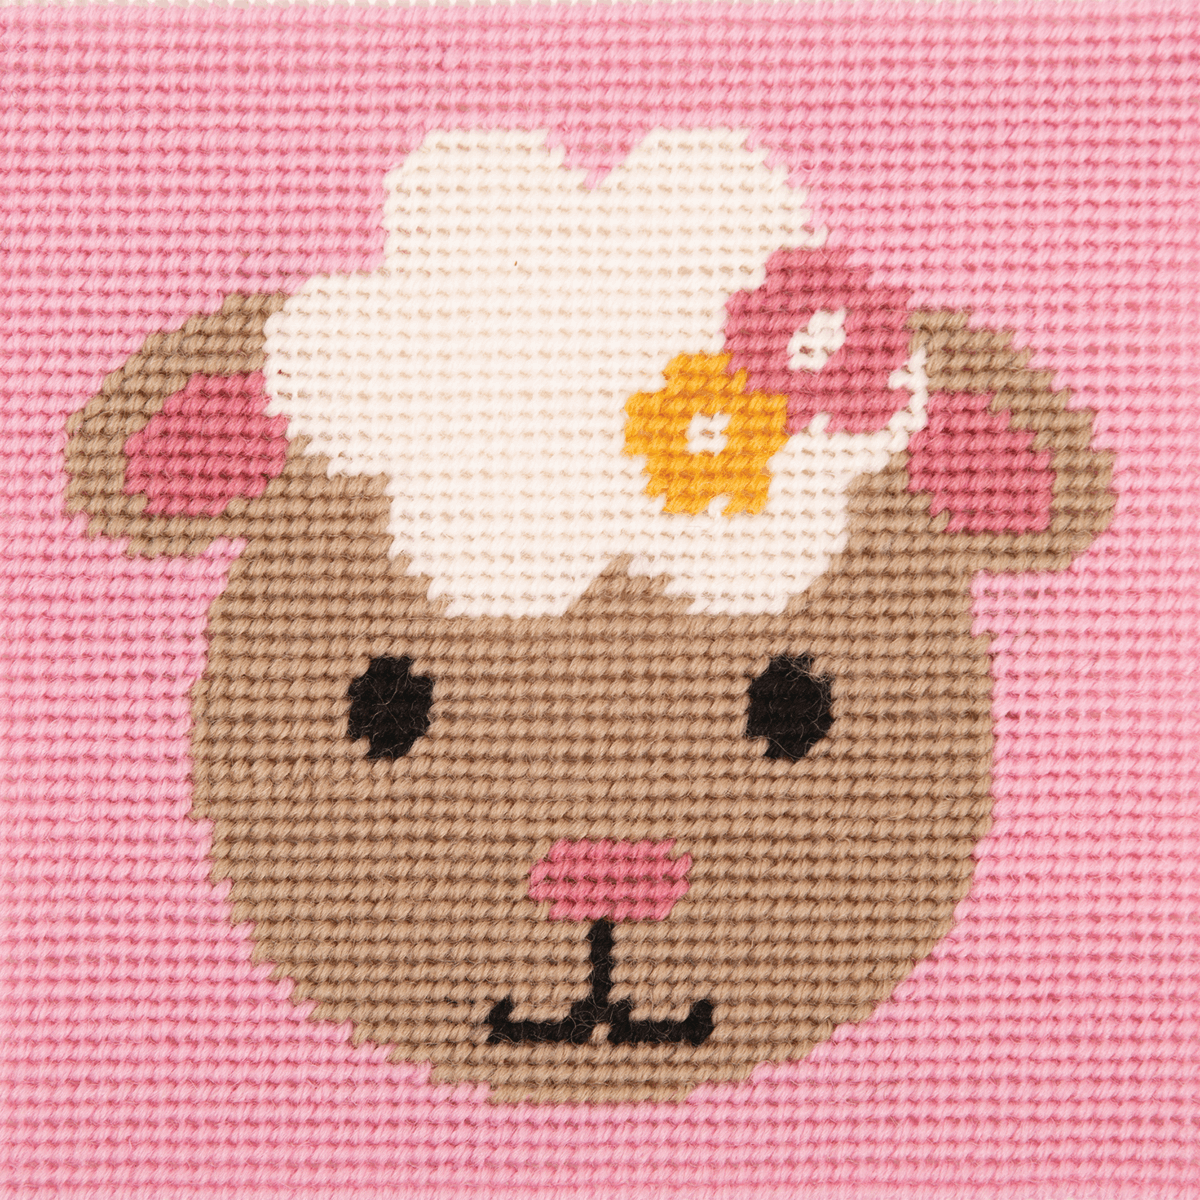 Anchor My 1st Tapestry Kit - Best Friends, Smiling Sheep